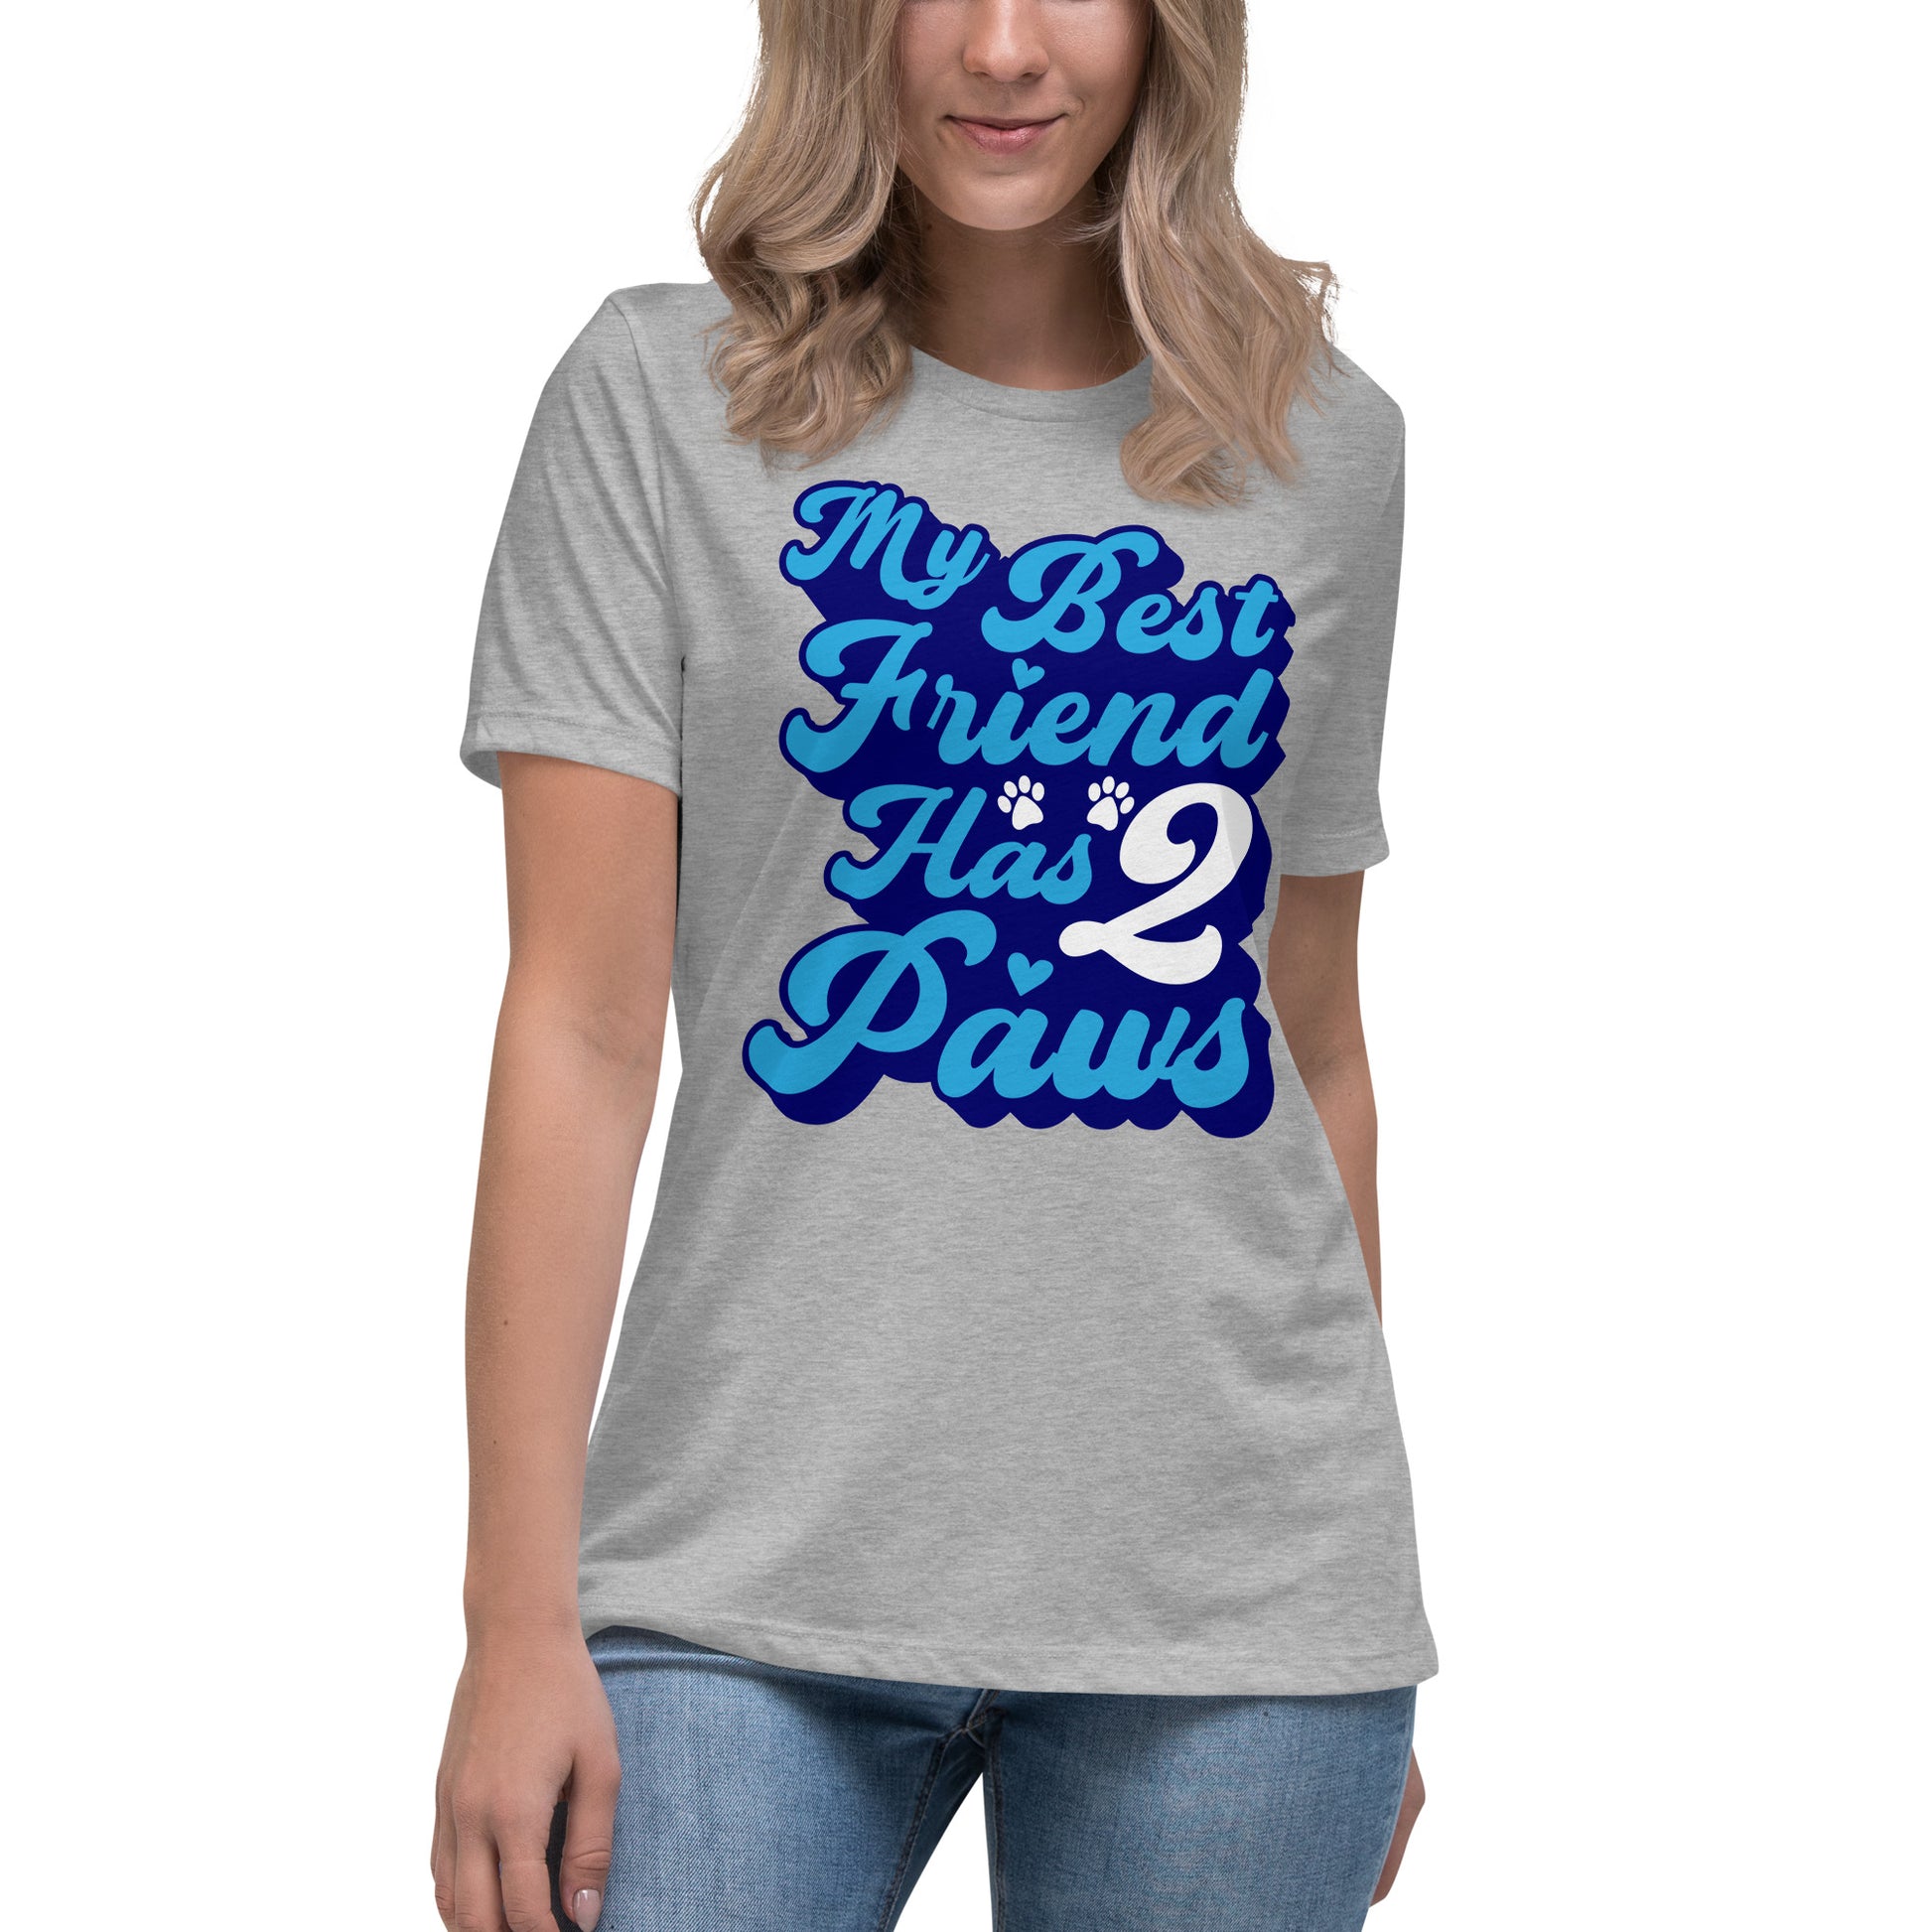 My best friend has 2 Paws women’s relaxed fit t-shirts by Dog Artistry athletic heather